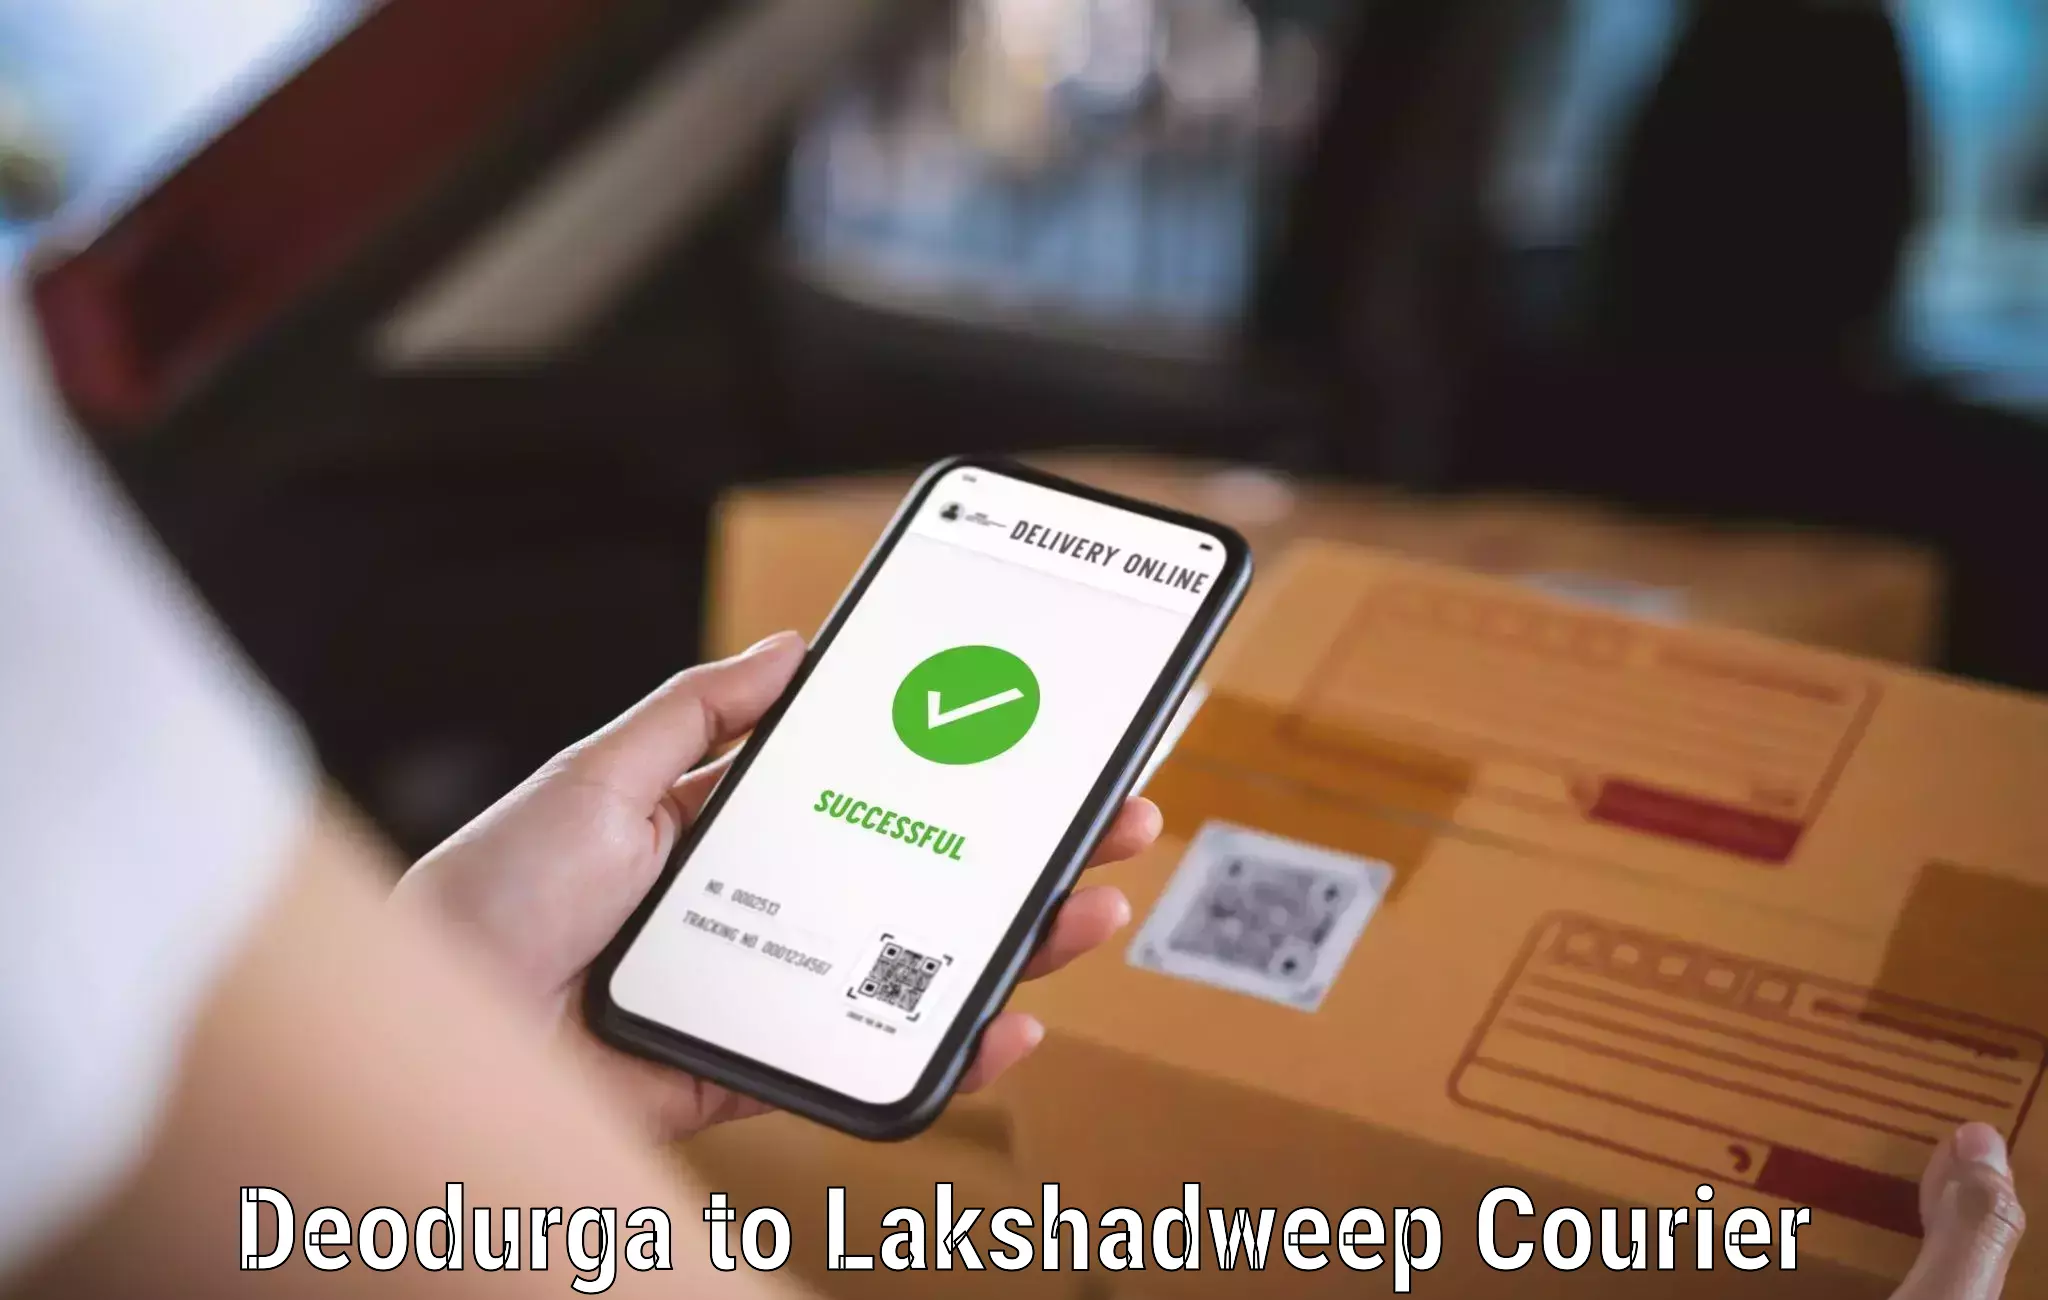 Full-service courier options Deodurga to Lakshadweep